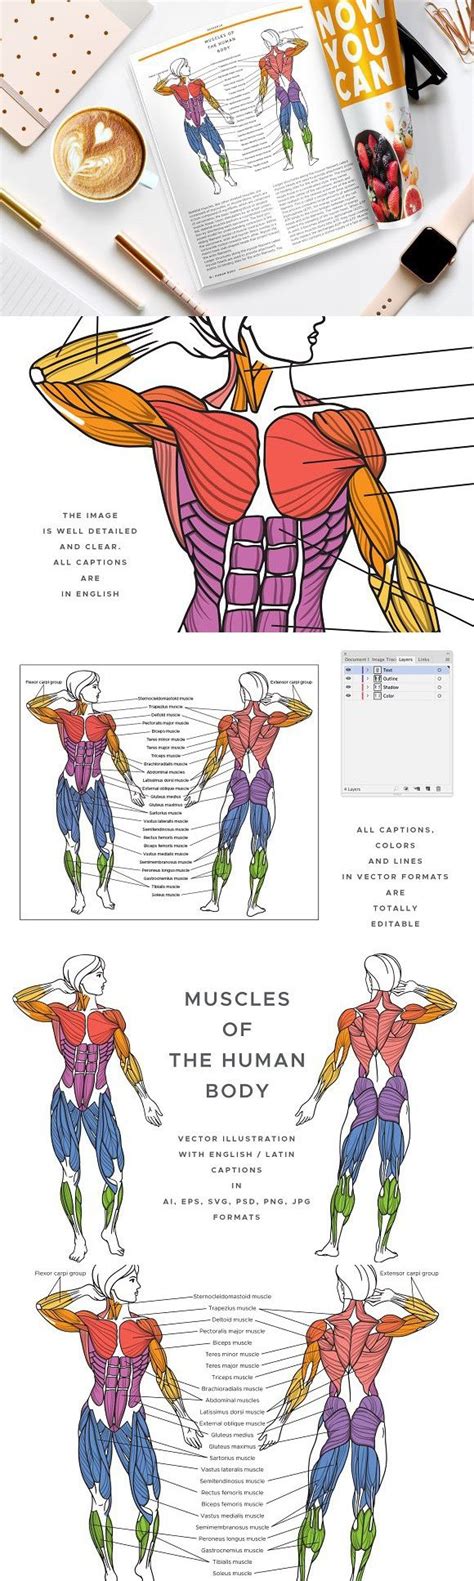 The following tables list some specific muscles in the human body by region of the body with links to pages about the specific muscles and/or pages that. Muscles Of The Human Body | Human muscular system, Human ...